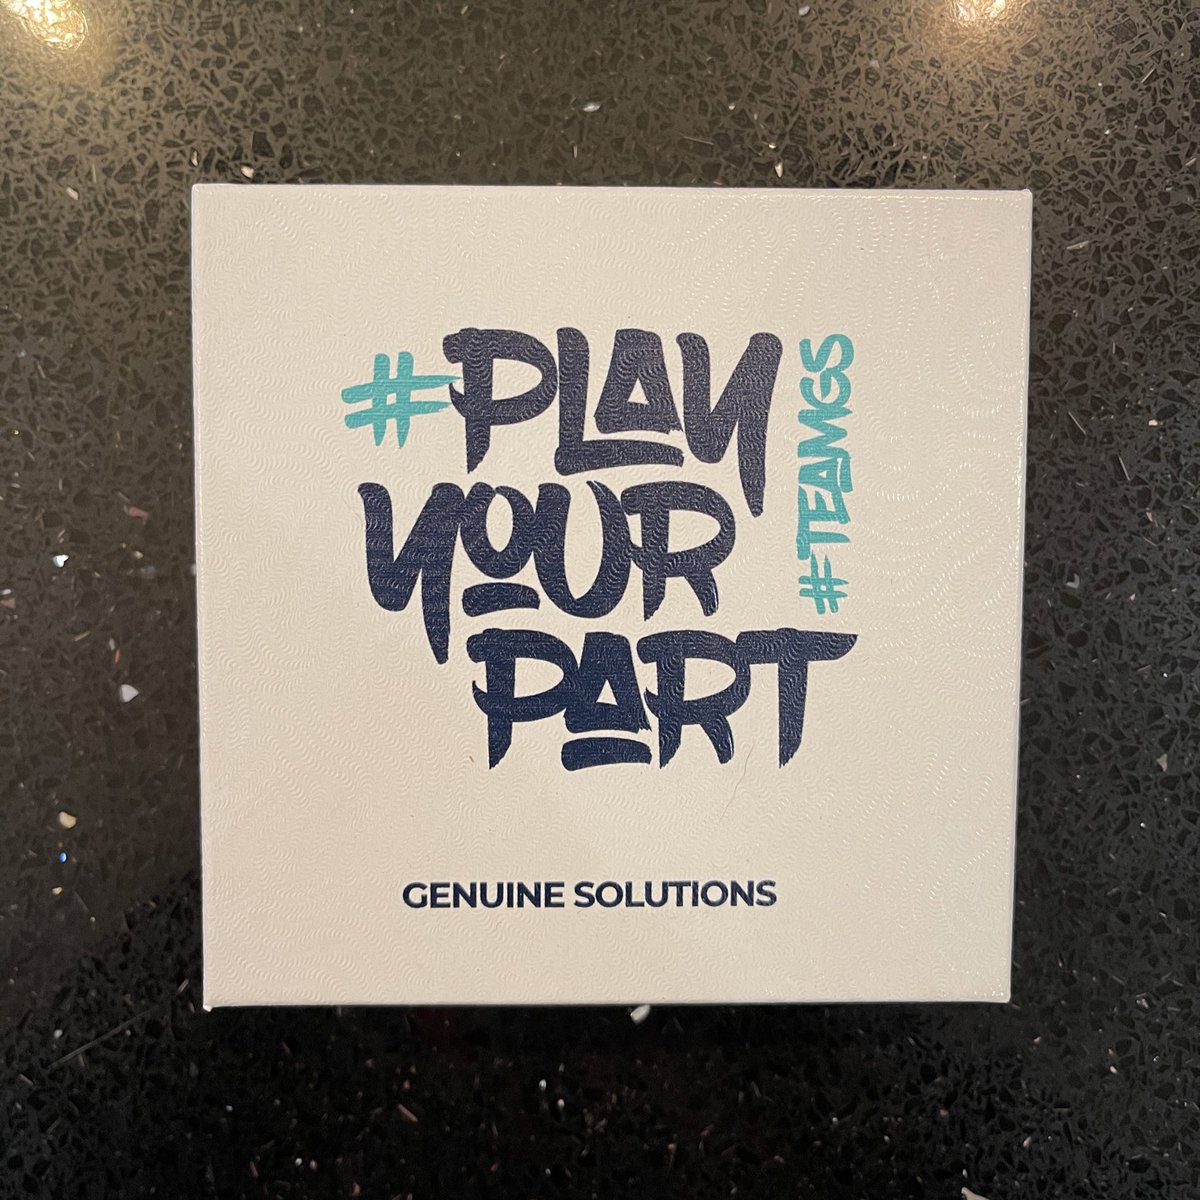 Fantastic Christmas gift from #GenuineSolutions made with recovered components. What a great idea! I wrote about @GSUKplc recently in this blog and it’s efforts to recover, re-use and recycle. ccsinsight.com/blog/the-long-… #PlayYourPart